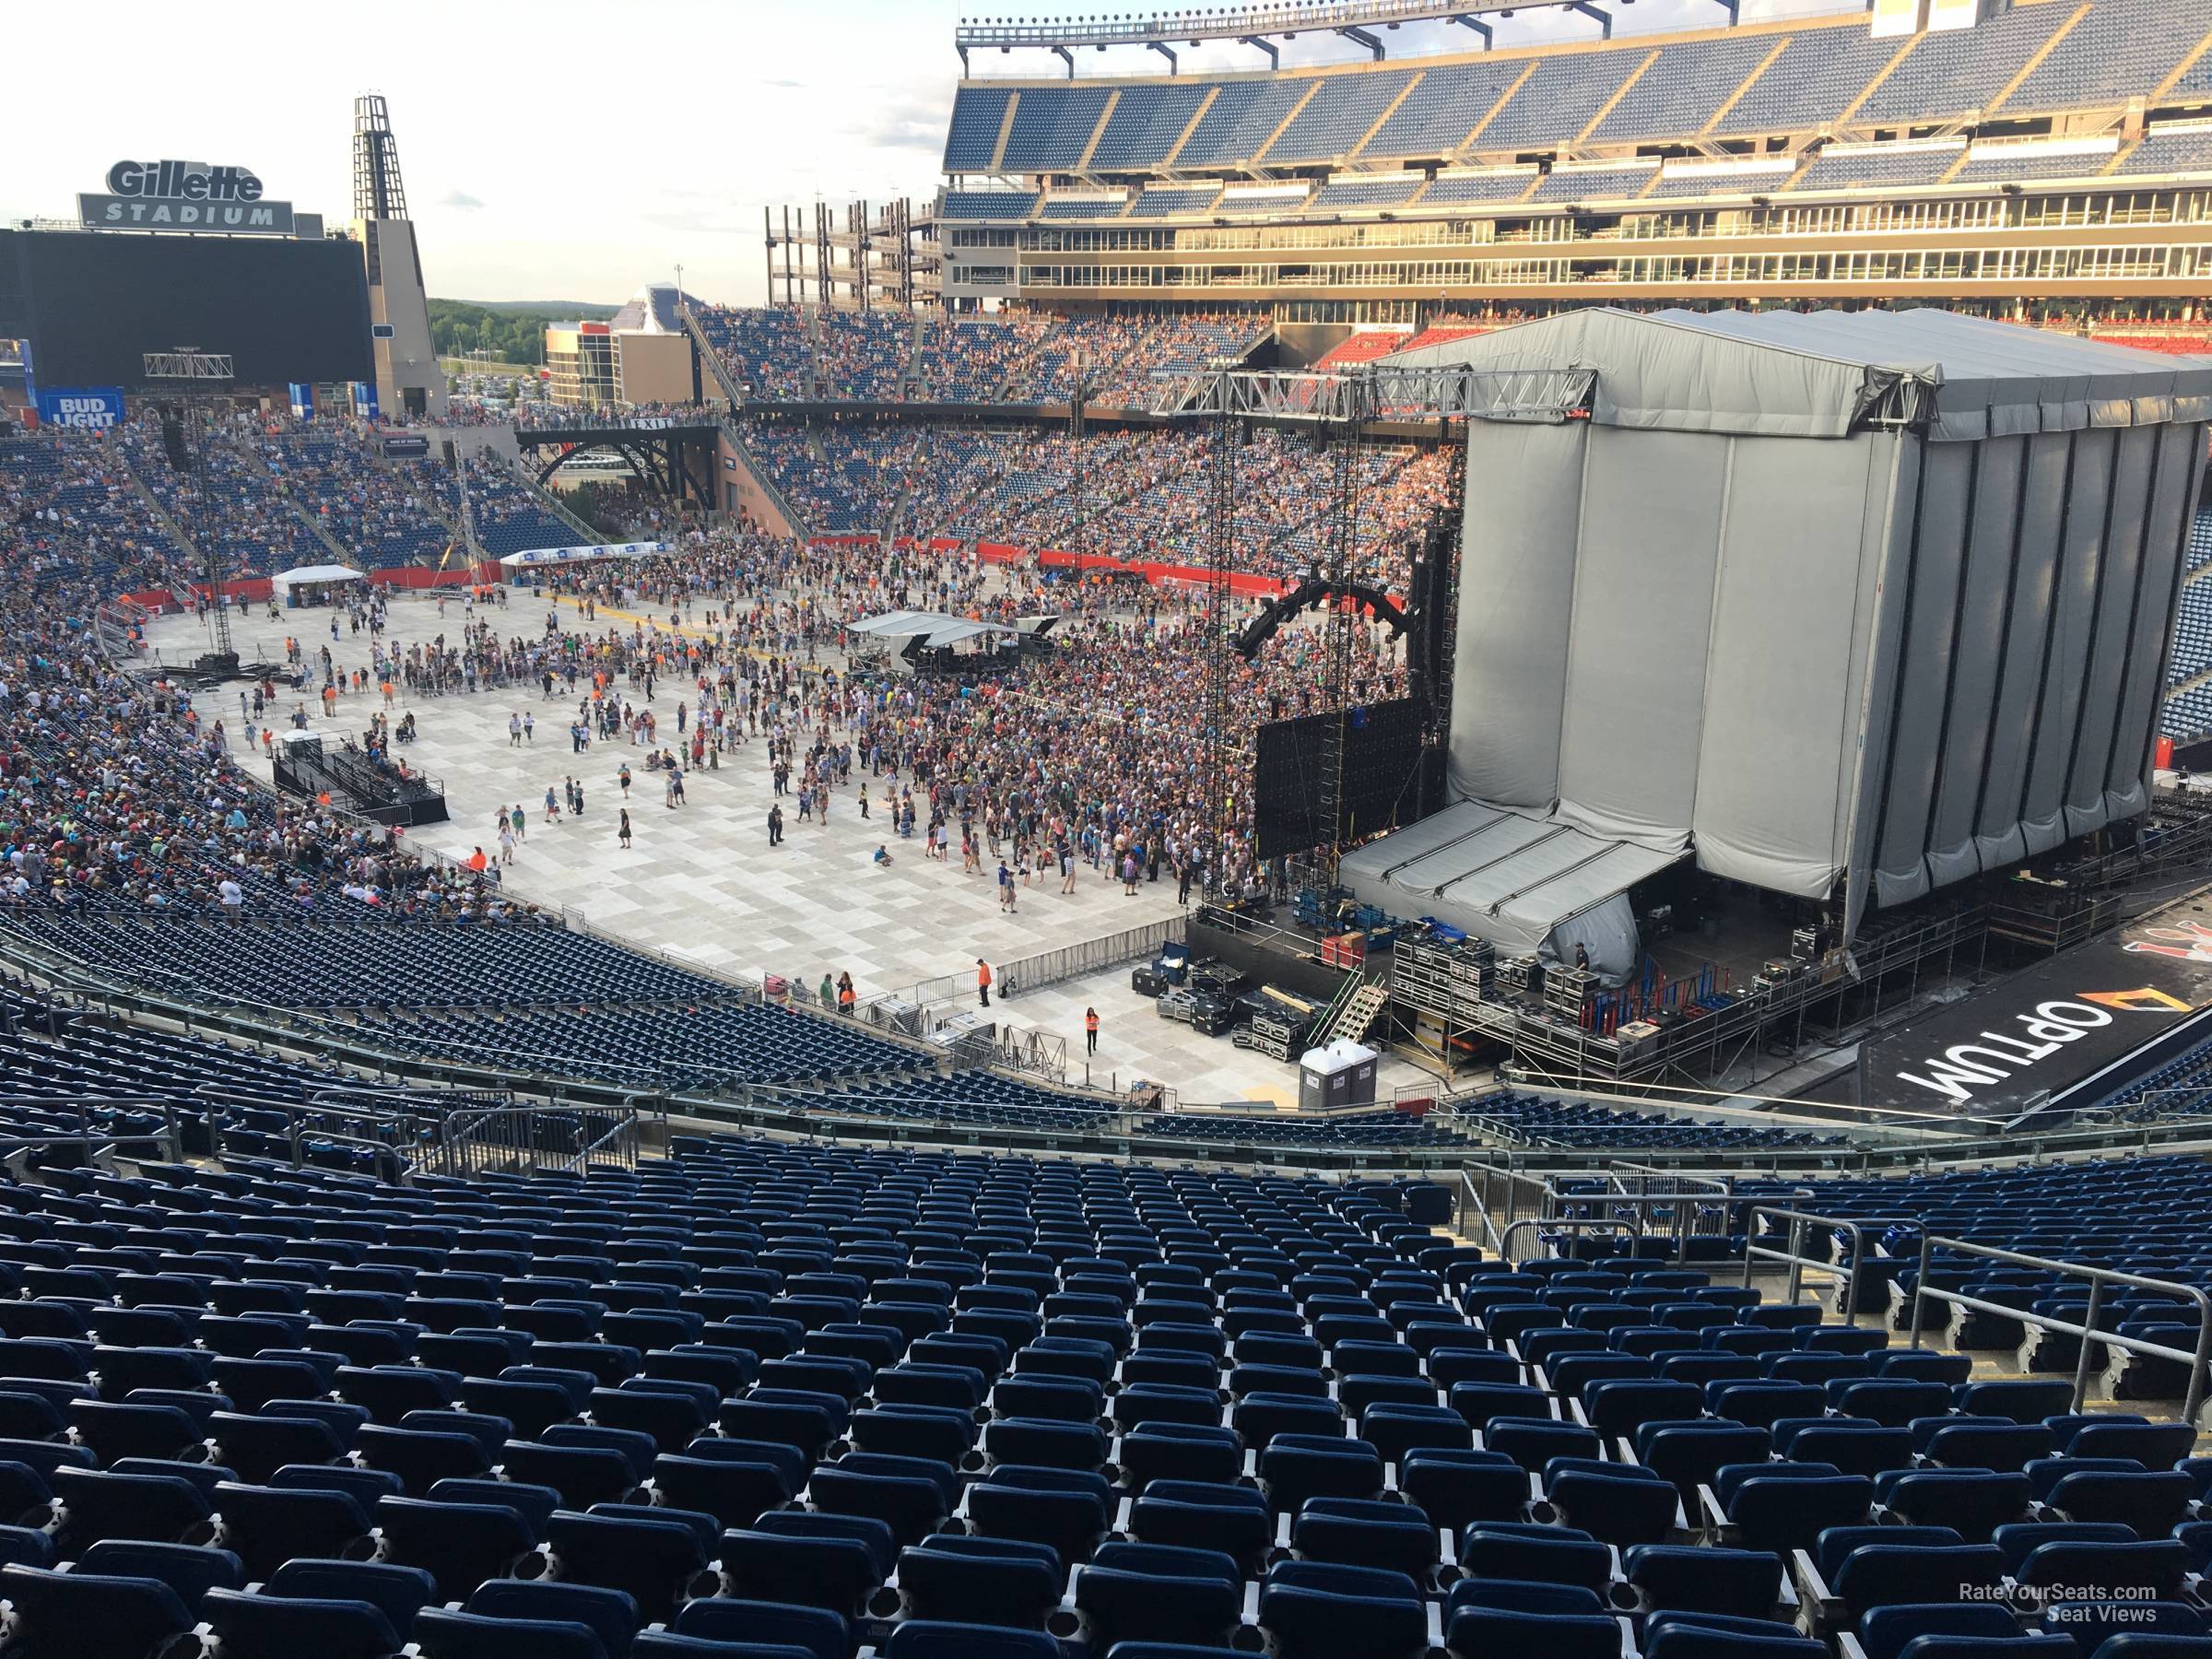 section 225, row 27 seat view  for concert - gillette stadium